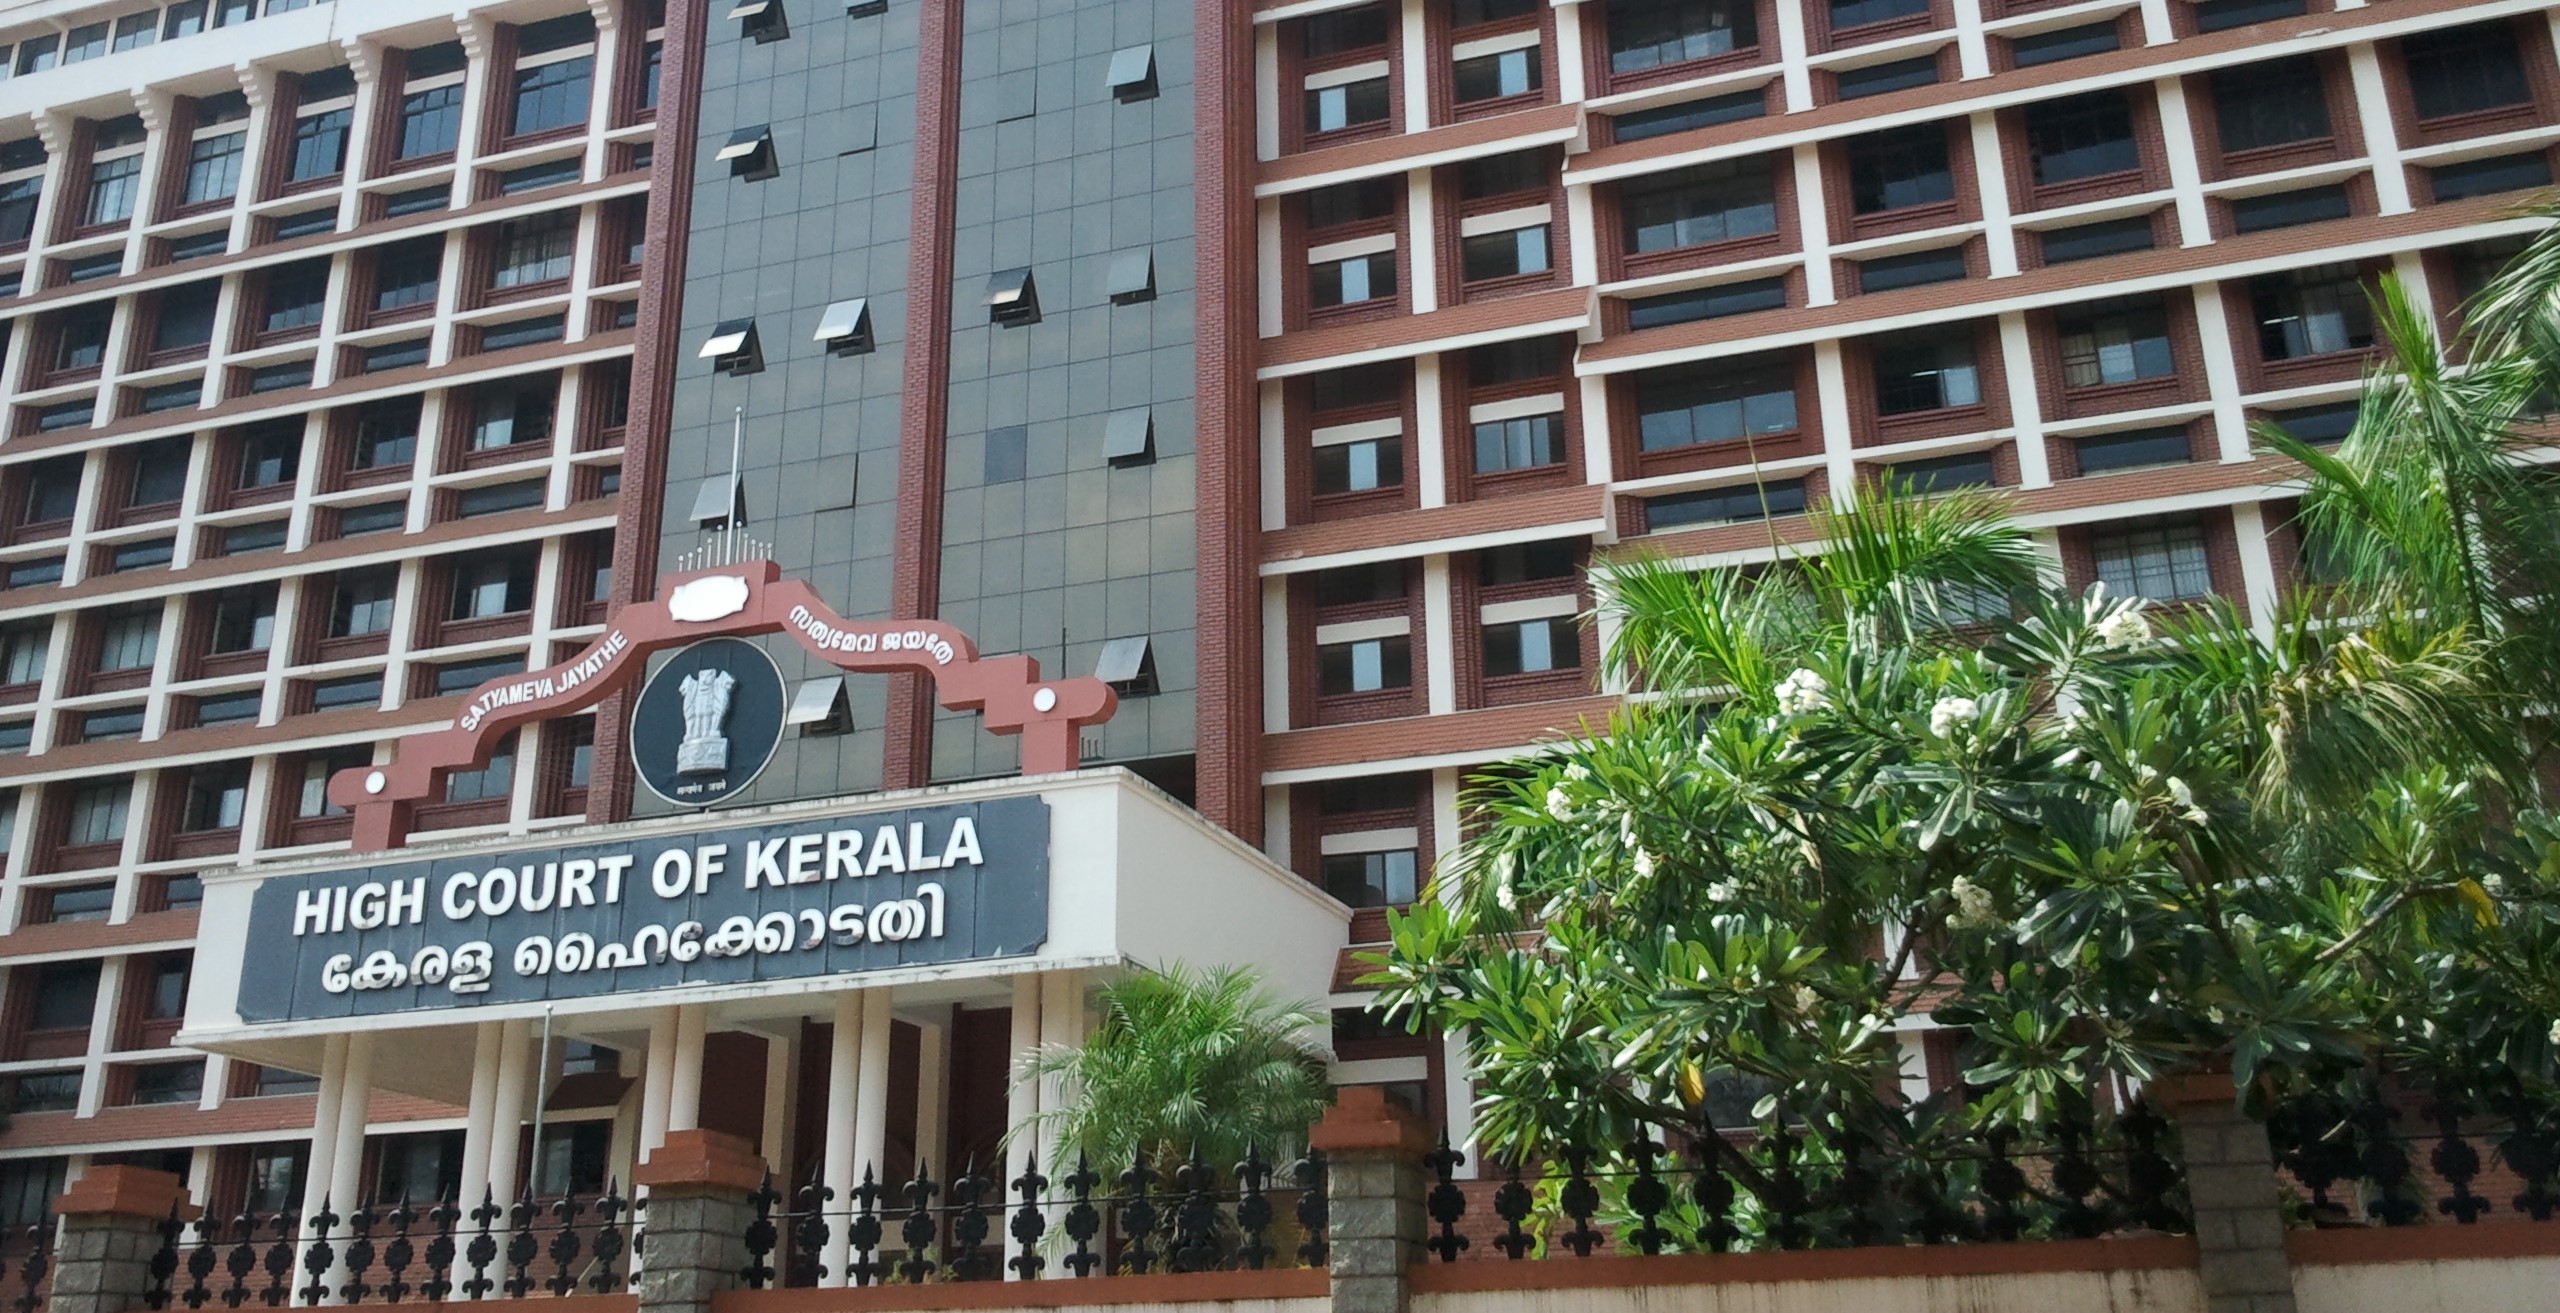 2017 actress assault case: Kerala HC allows state plea for forensic analysis of memory card